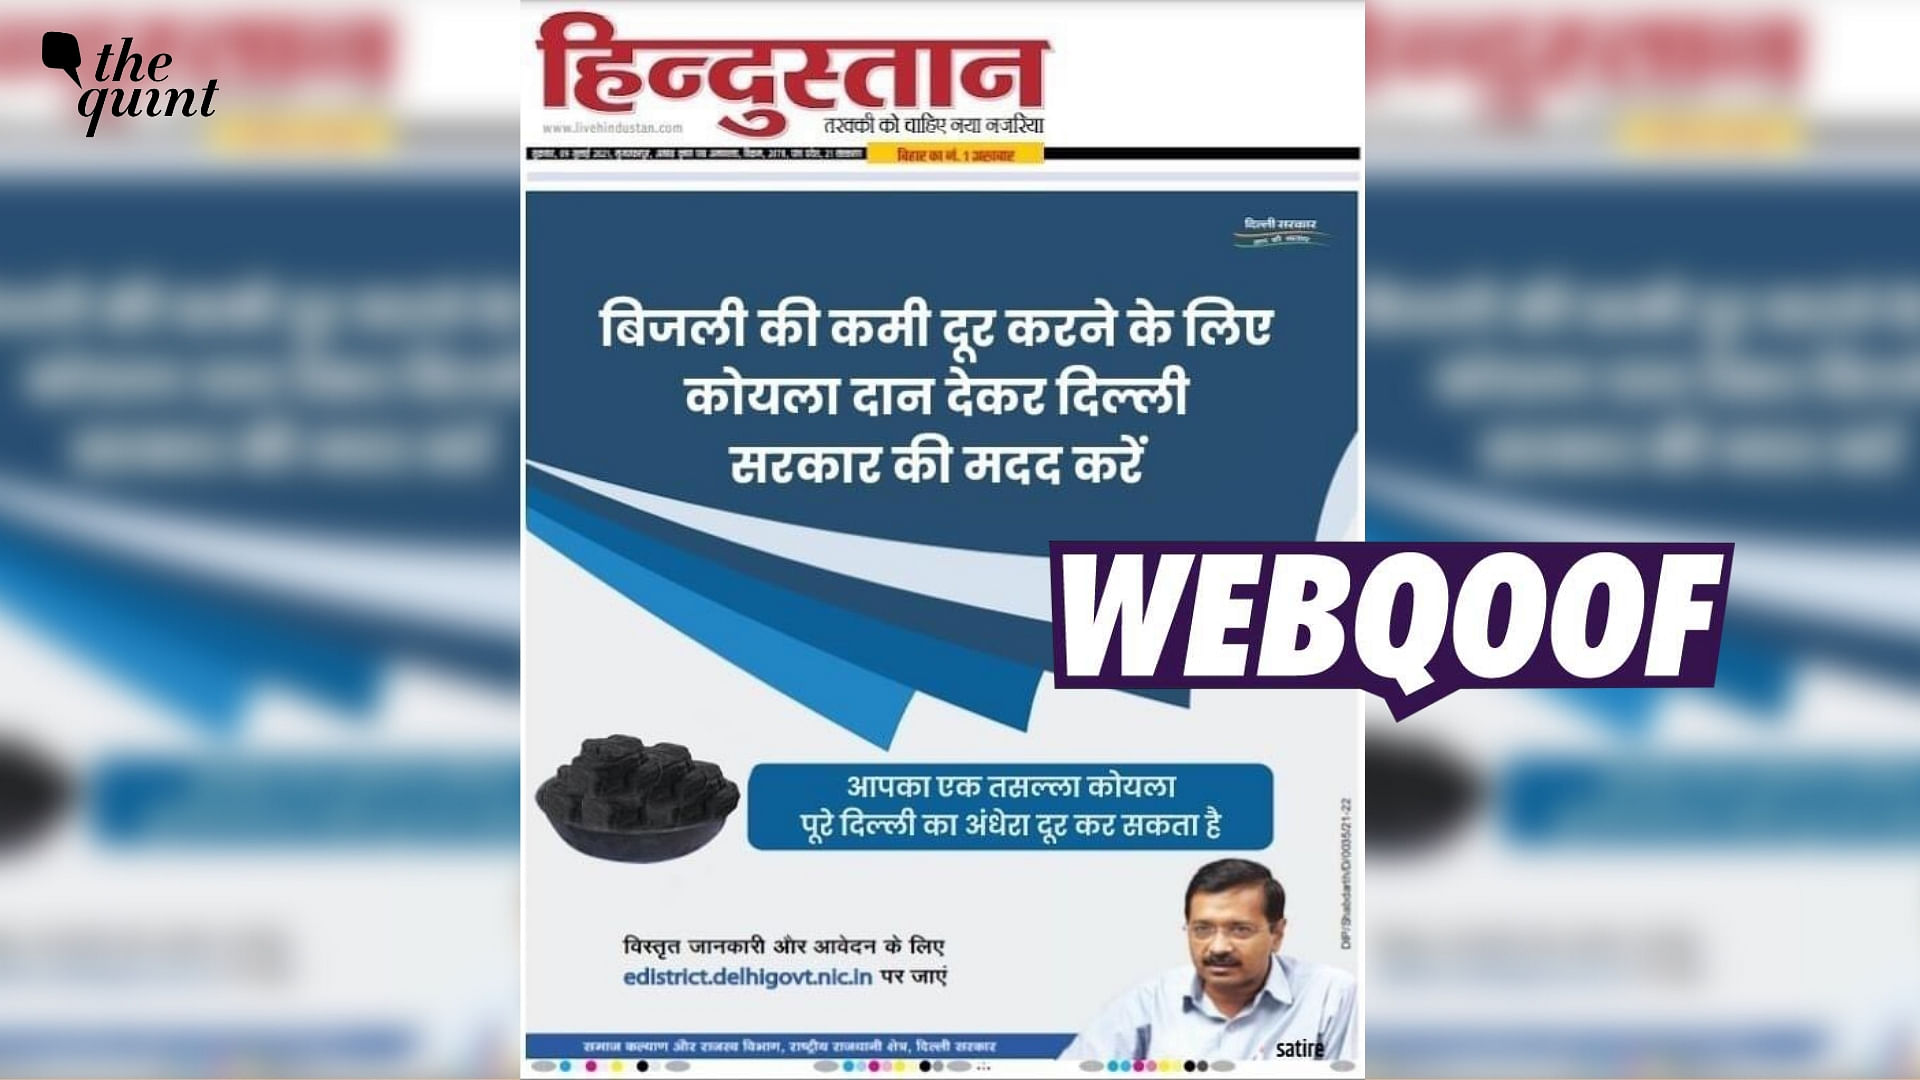 <div class="paragraphs"><p>The claim states that this ad was issued by the Delhi government following coal shortage.</p></div>